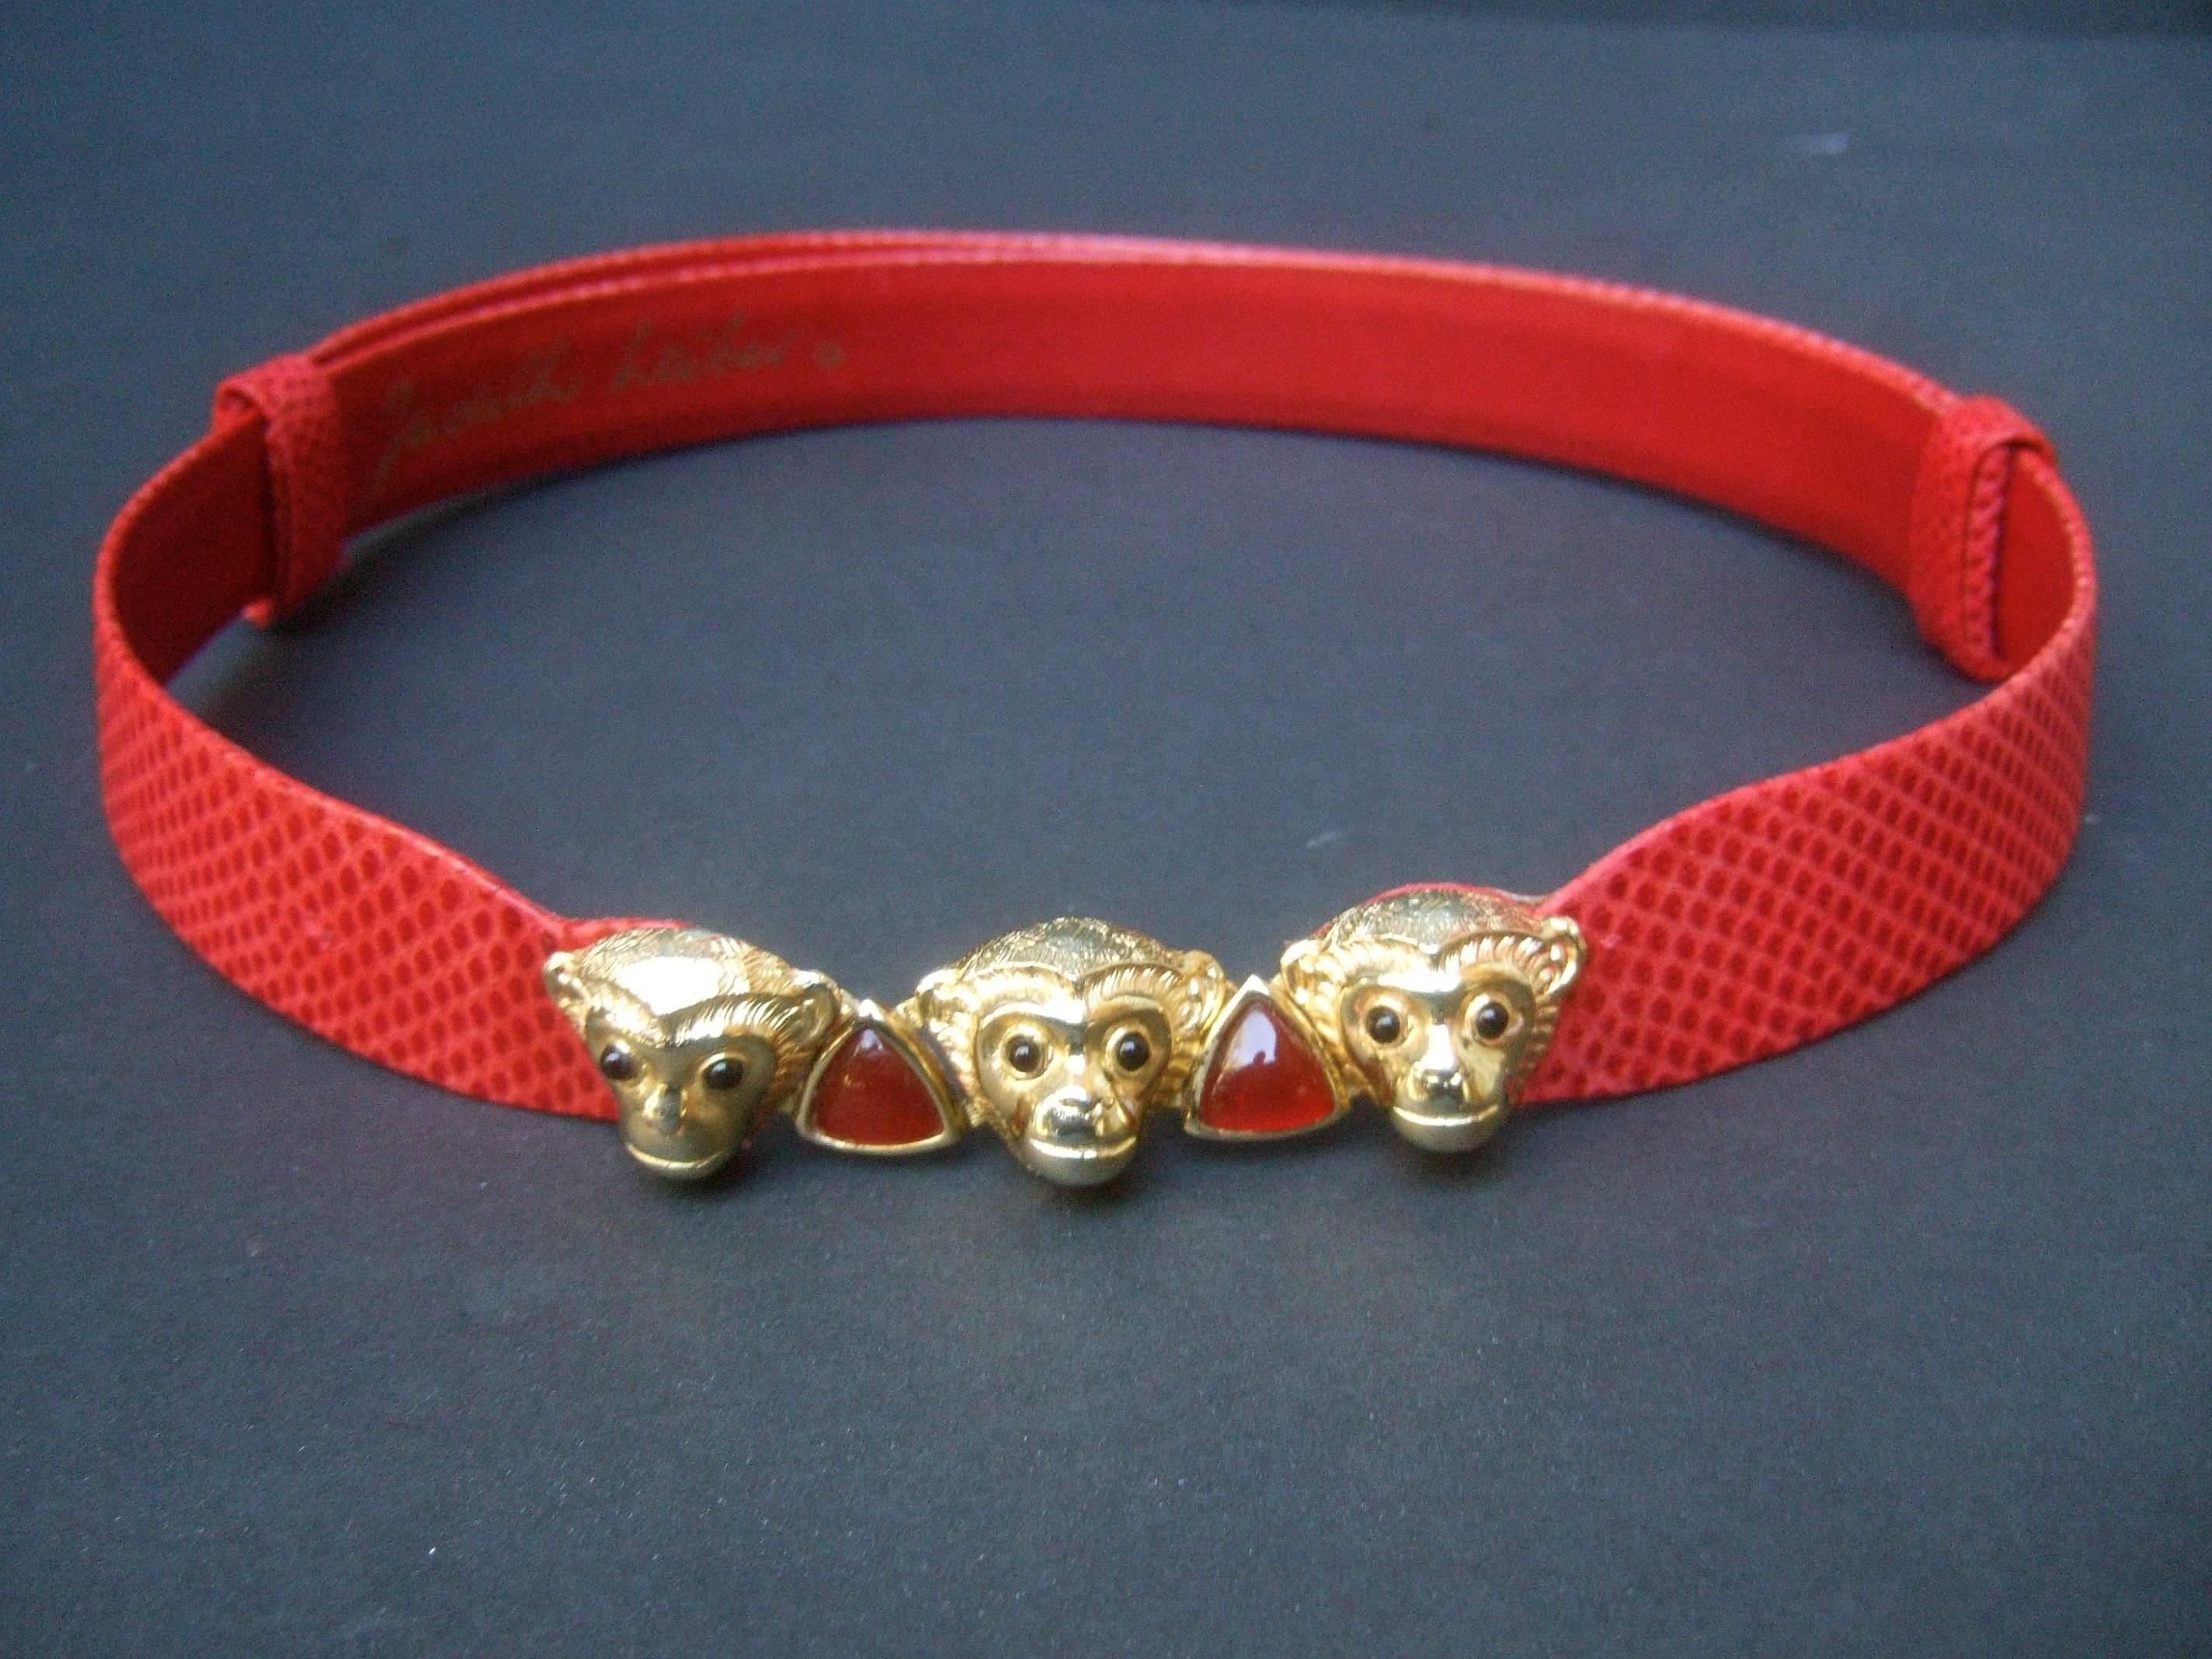 Judith Leiber Charming monkey buckle embossed red leather belt 
The stylish belt is designed with a trio of jeweled gilt metal monkeys
that serve as the buckle

The adorable monkeys are embellished with tiny black 
glass cabochon eyes. The center